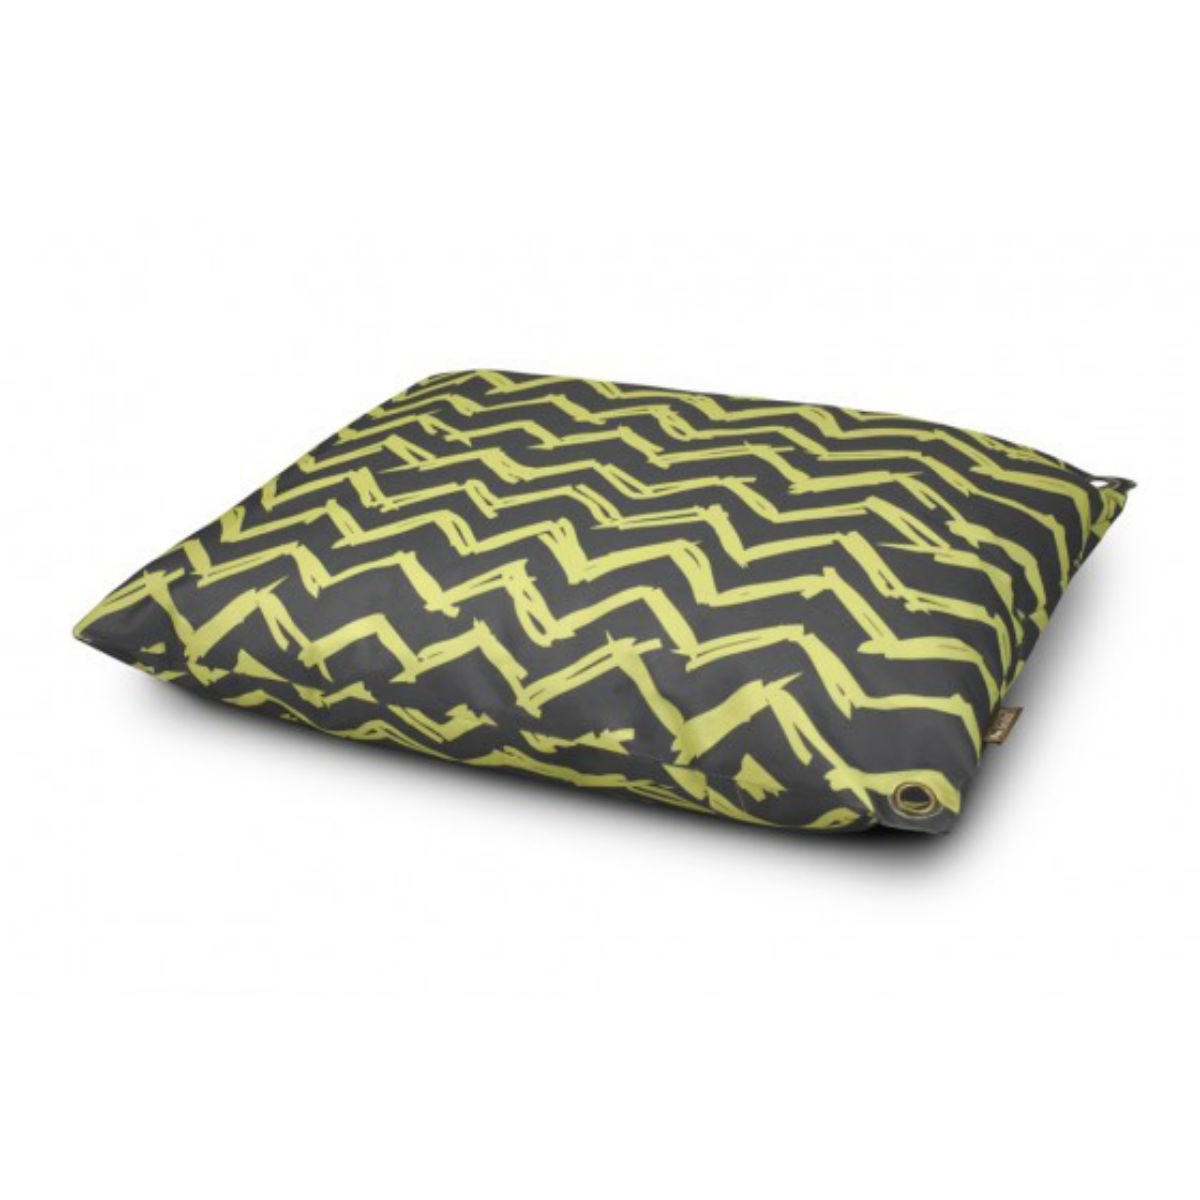 P.L.A.Y. Chevron Outdoor Dog Bed - Daffodil Yellow